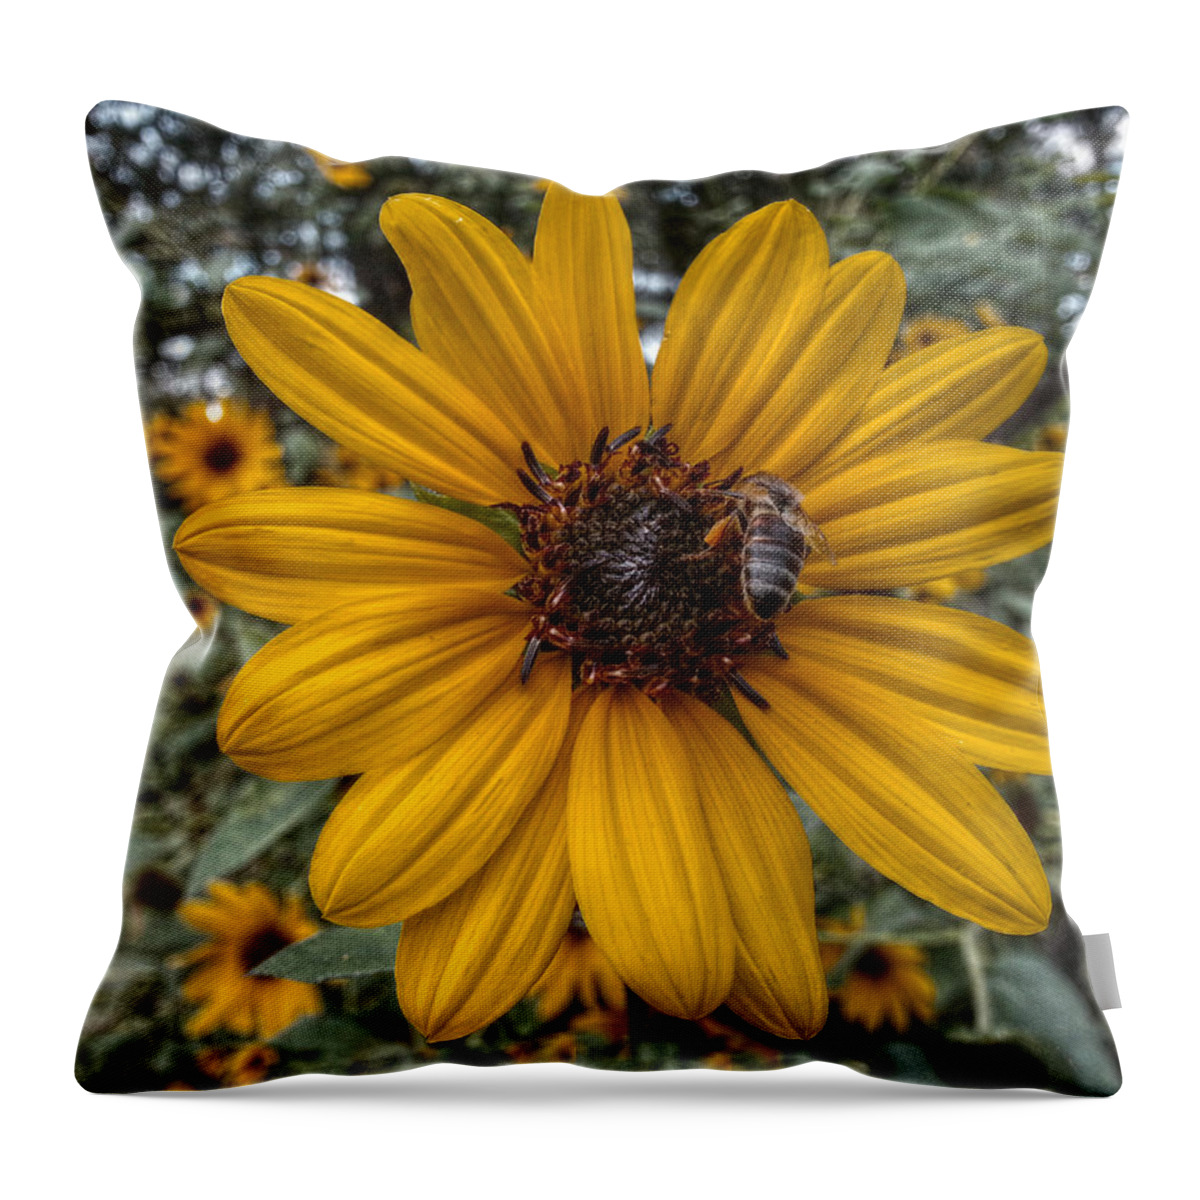 Sunflower Throw Pillow featuring the digital art Suppers' Ready by Linda Unger